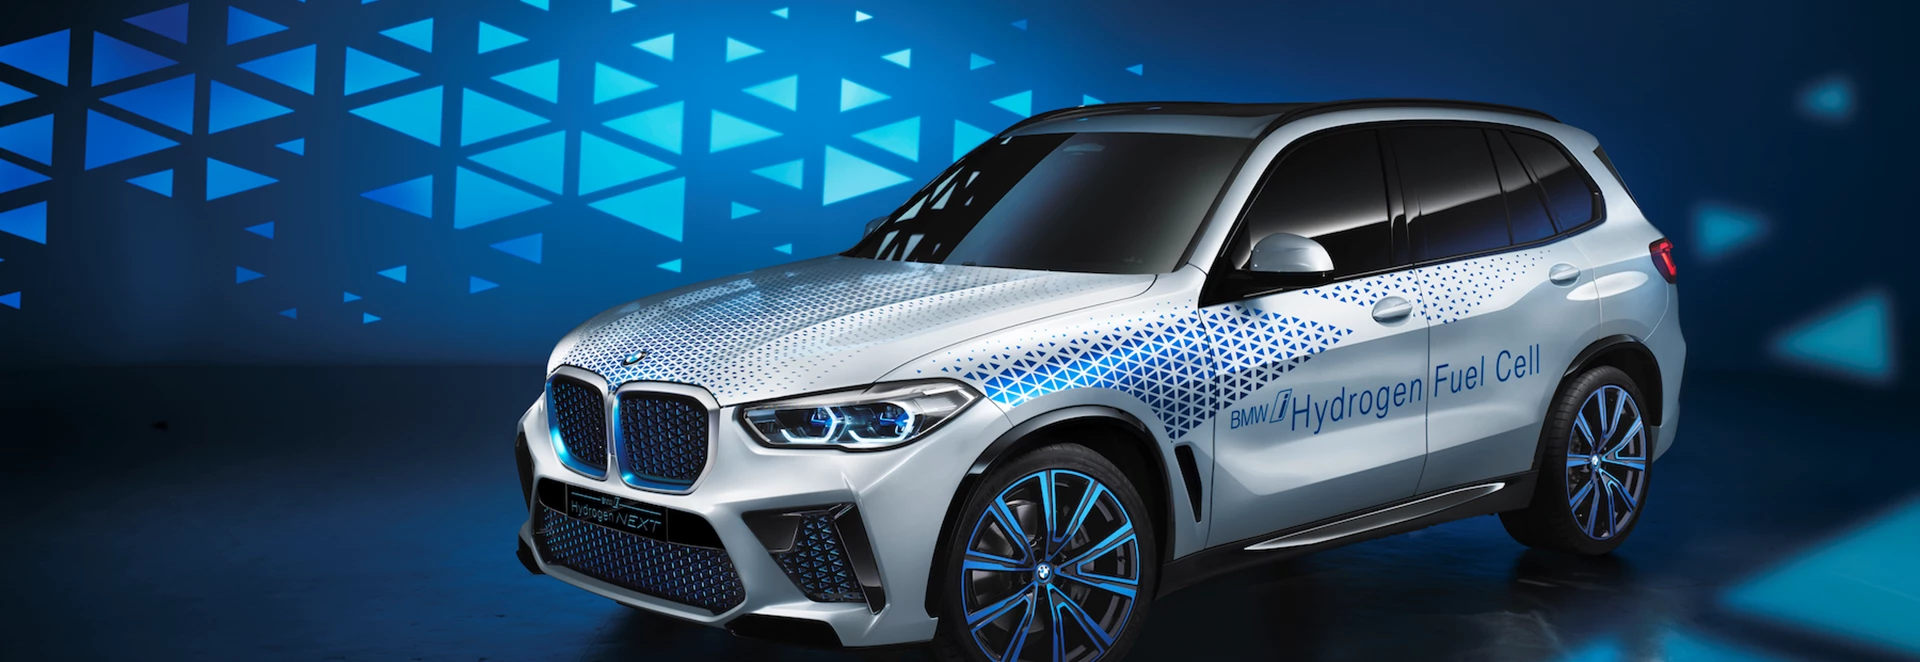 BMW details new hybrid technology as it commits to new fuel cell models